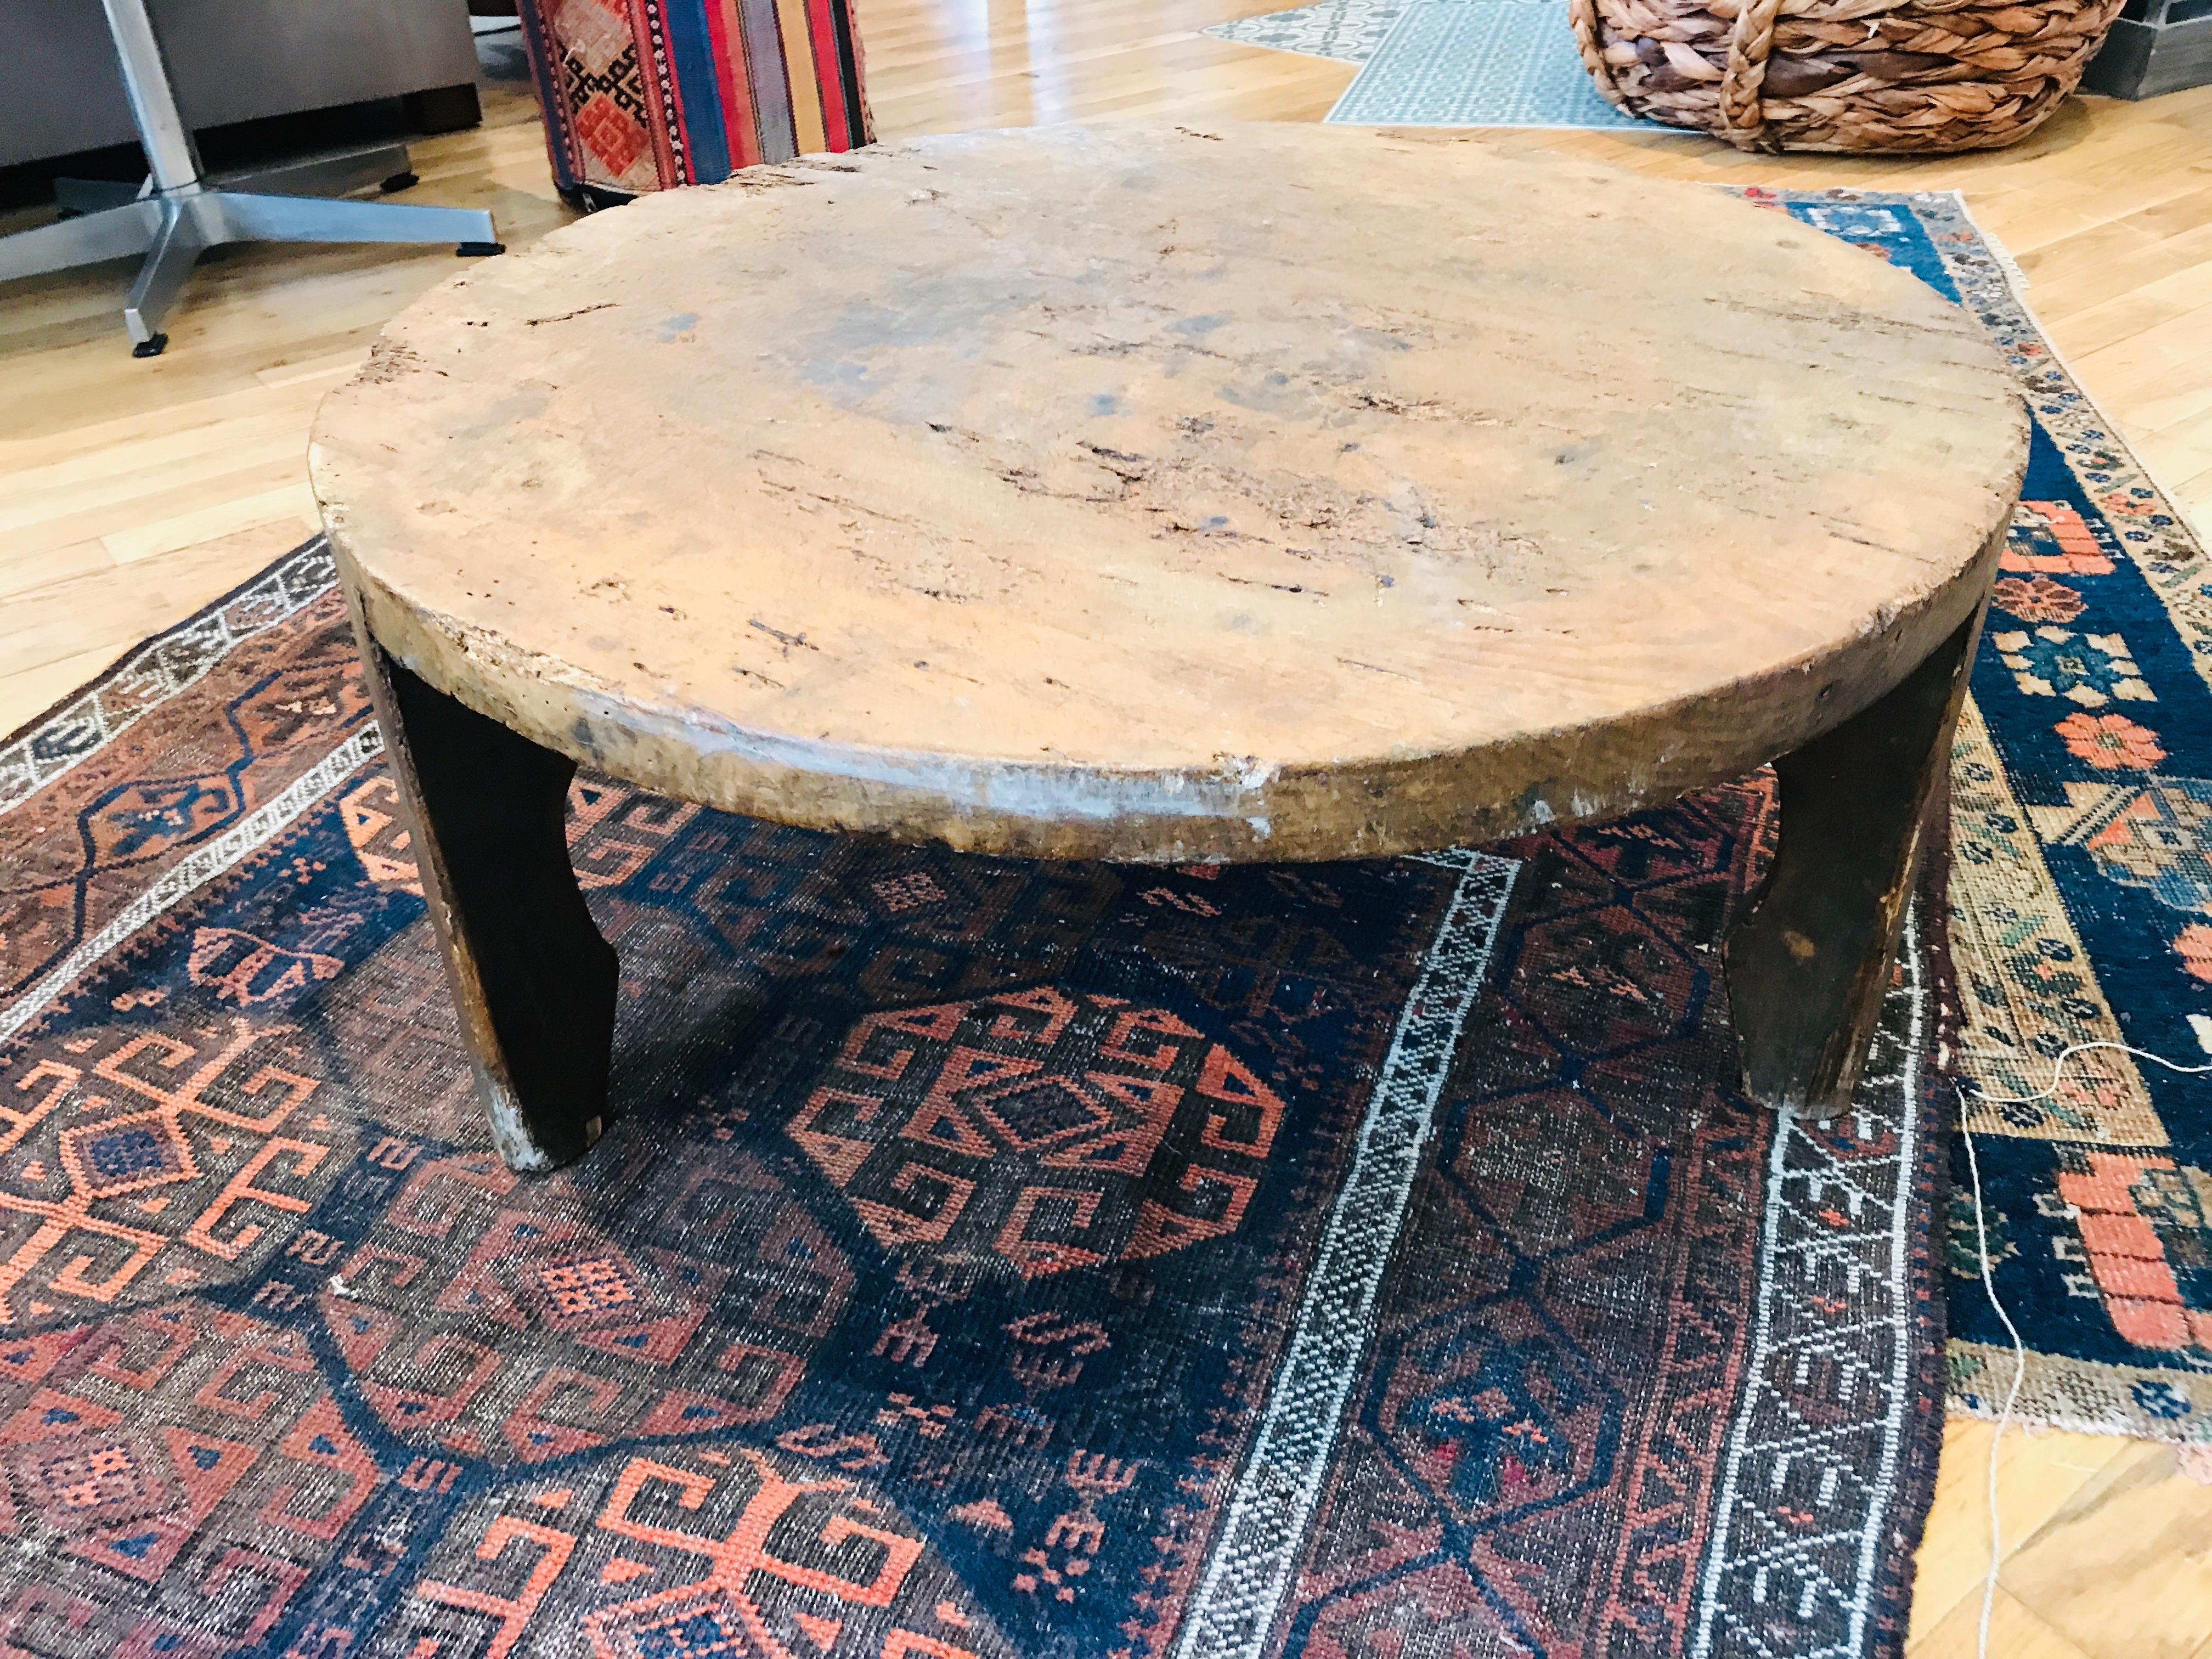 A low sitting vintage French side table with natural oak exposed. Perfect for a effortless, relaxed and earthy setting. This side table will compliment any bohemian seating area.